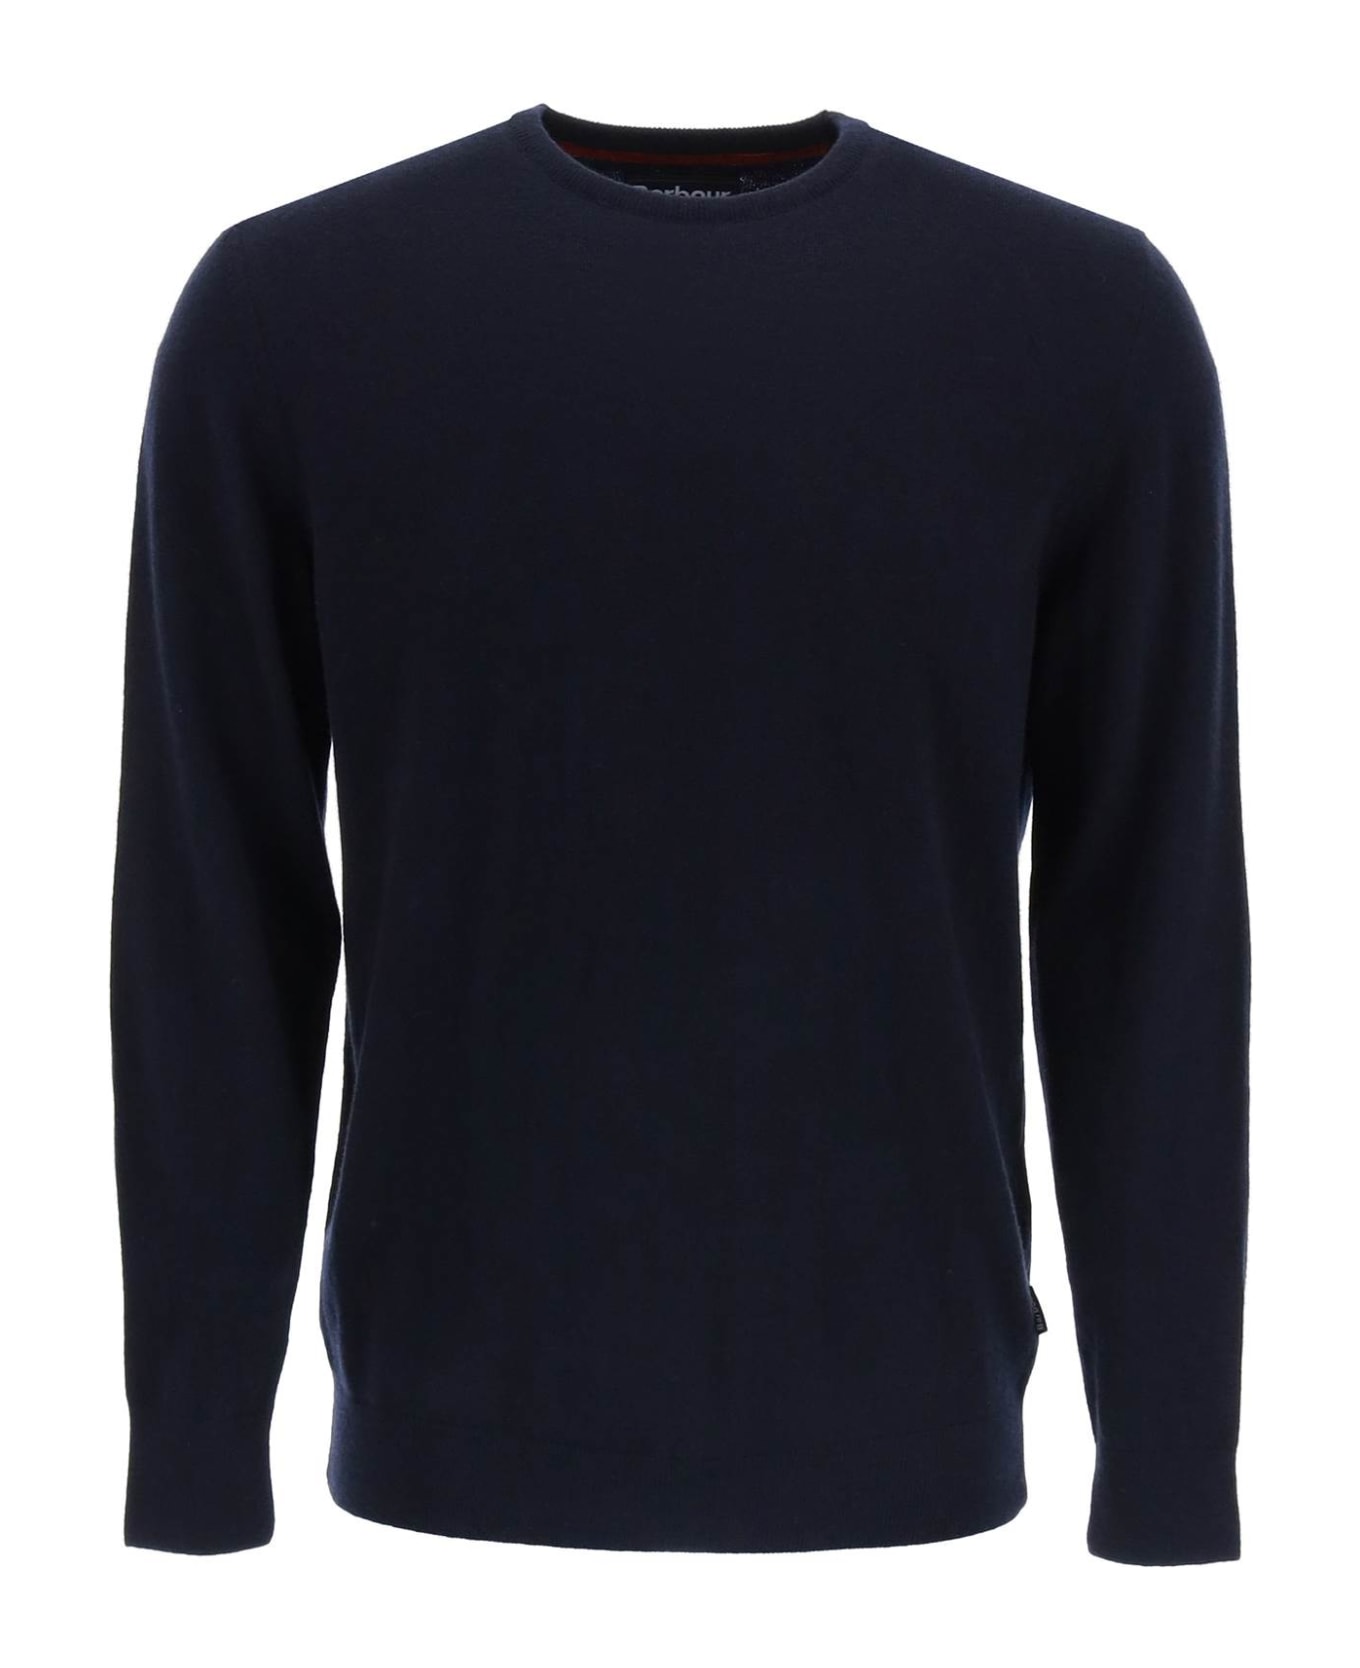 Barbour 'harrow' Wool And Cashmere Sweater - Navy